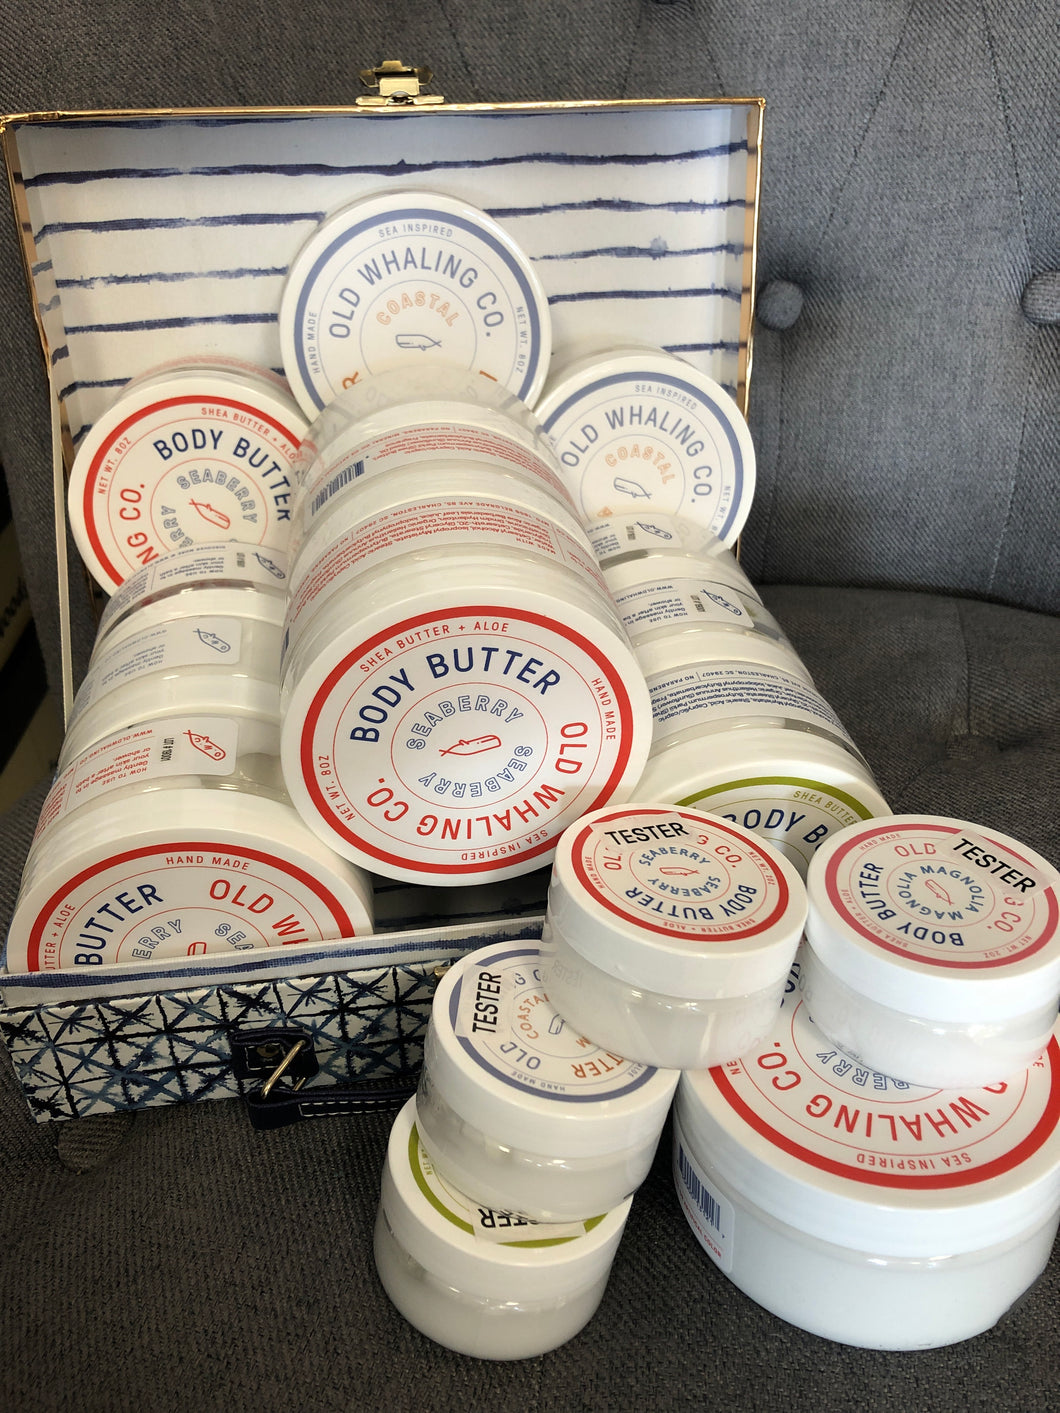 Body Butter - Boutique 309